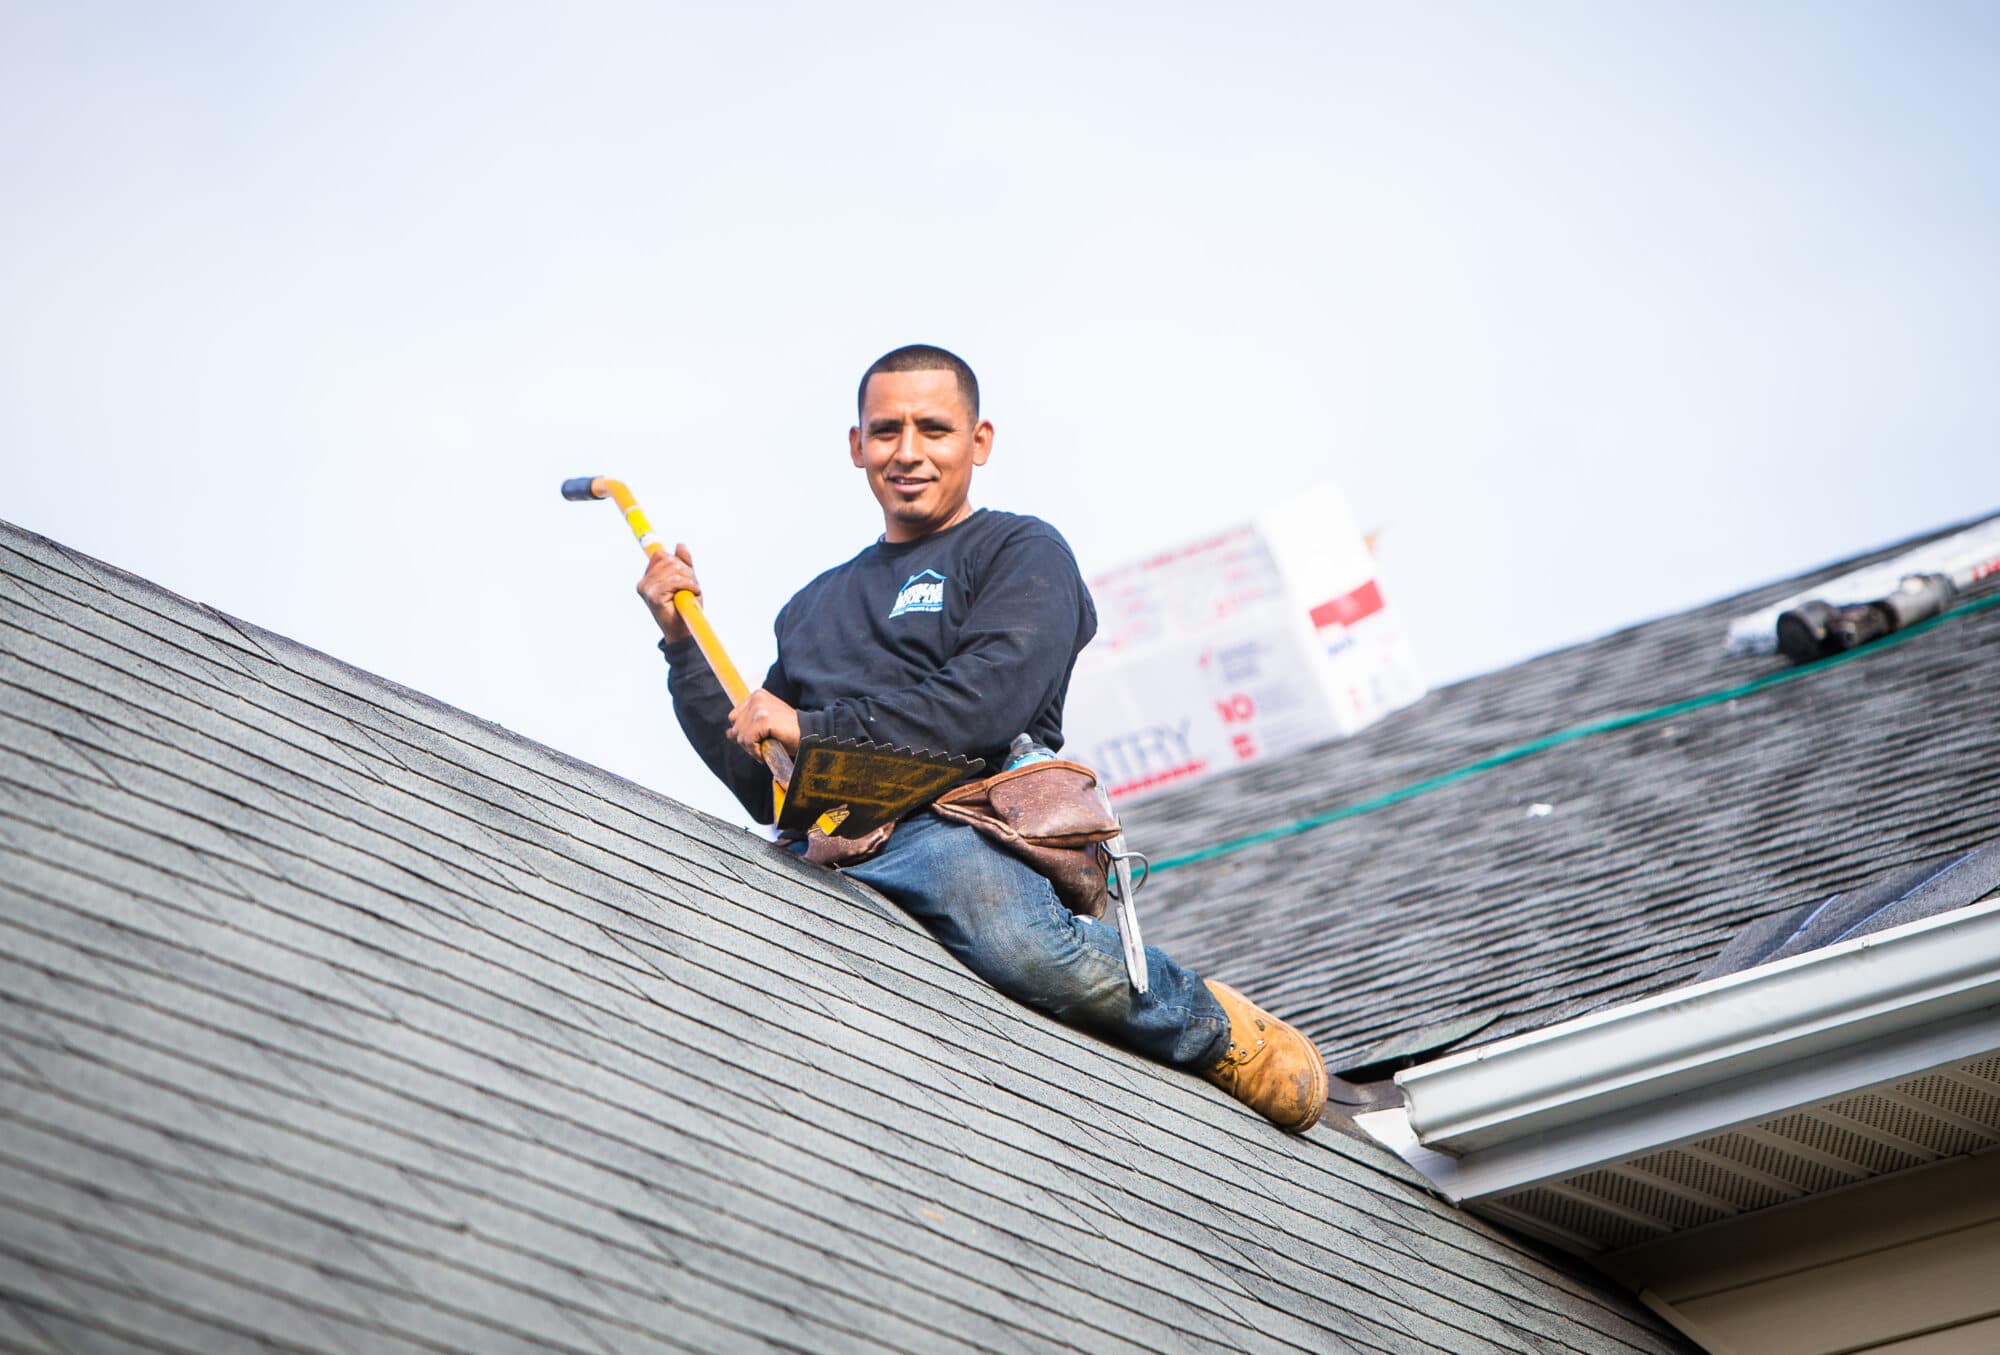 Do You Need a New Roof, or Just a Roof Repair? - Landmark Roofing